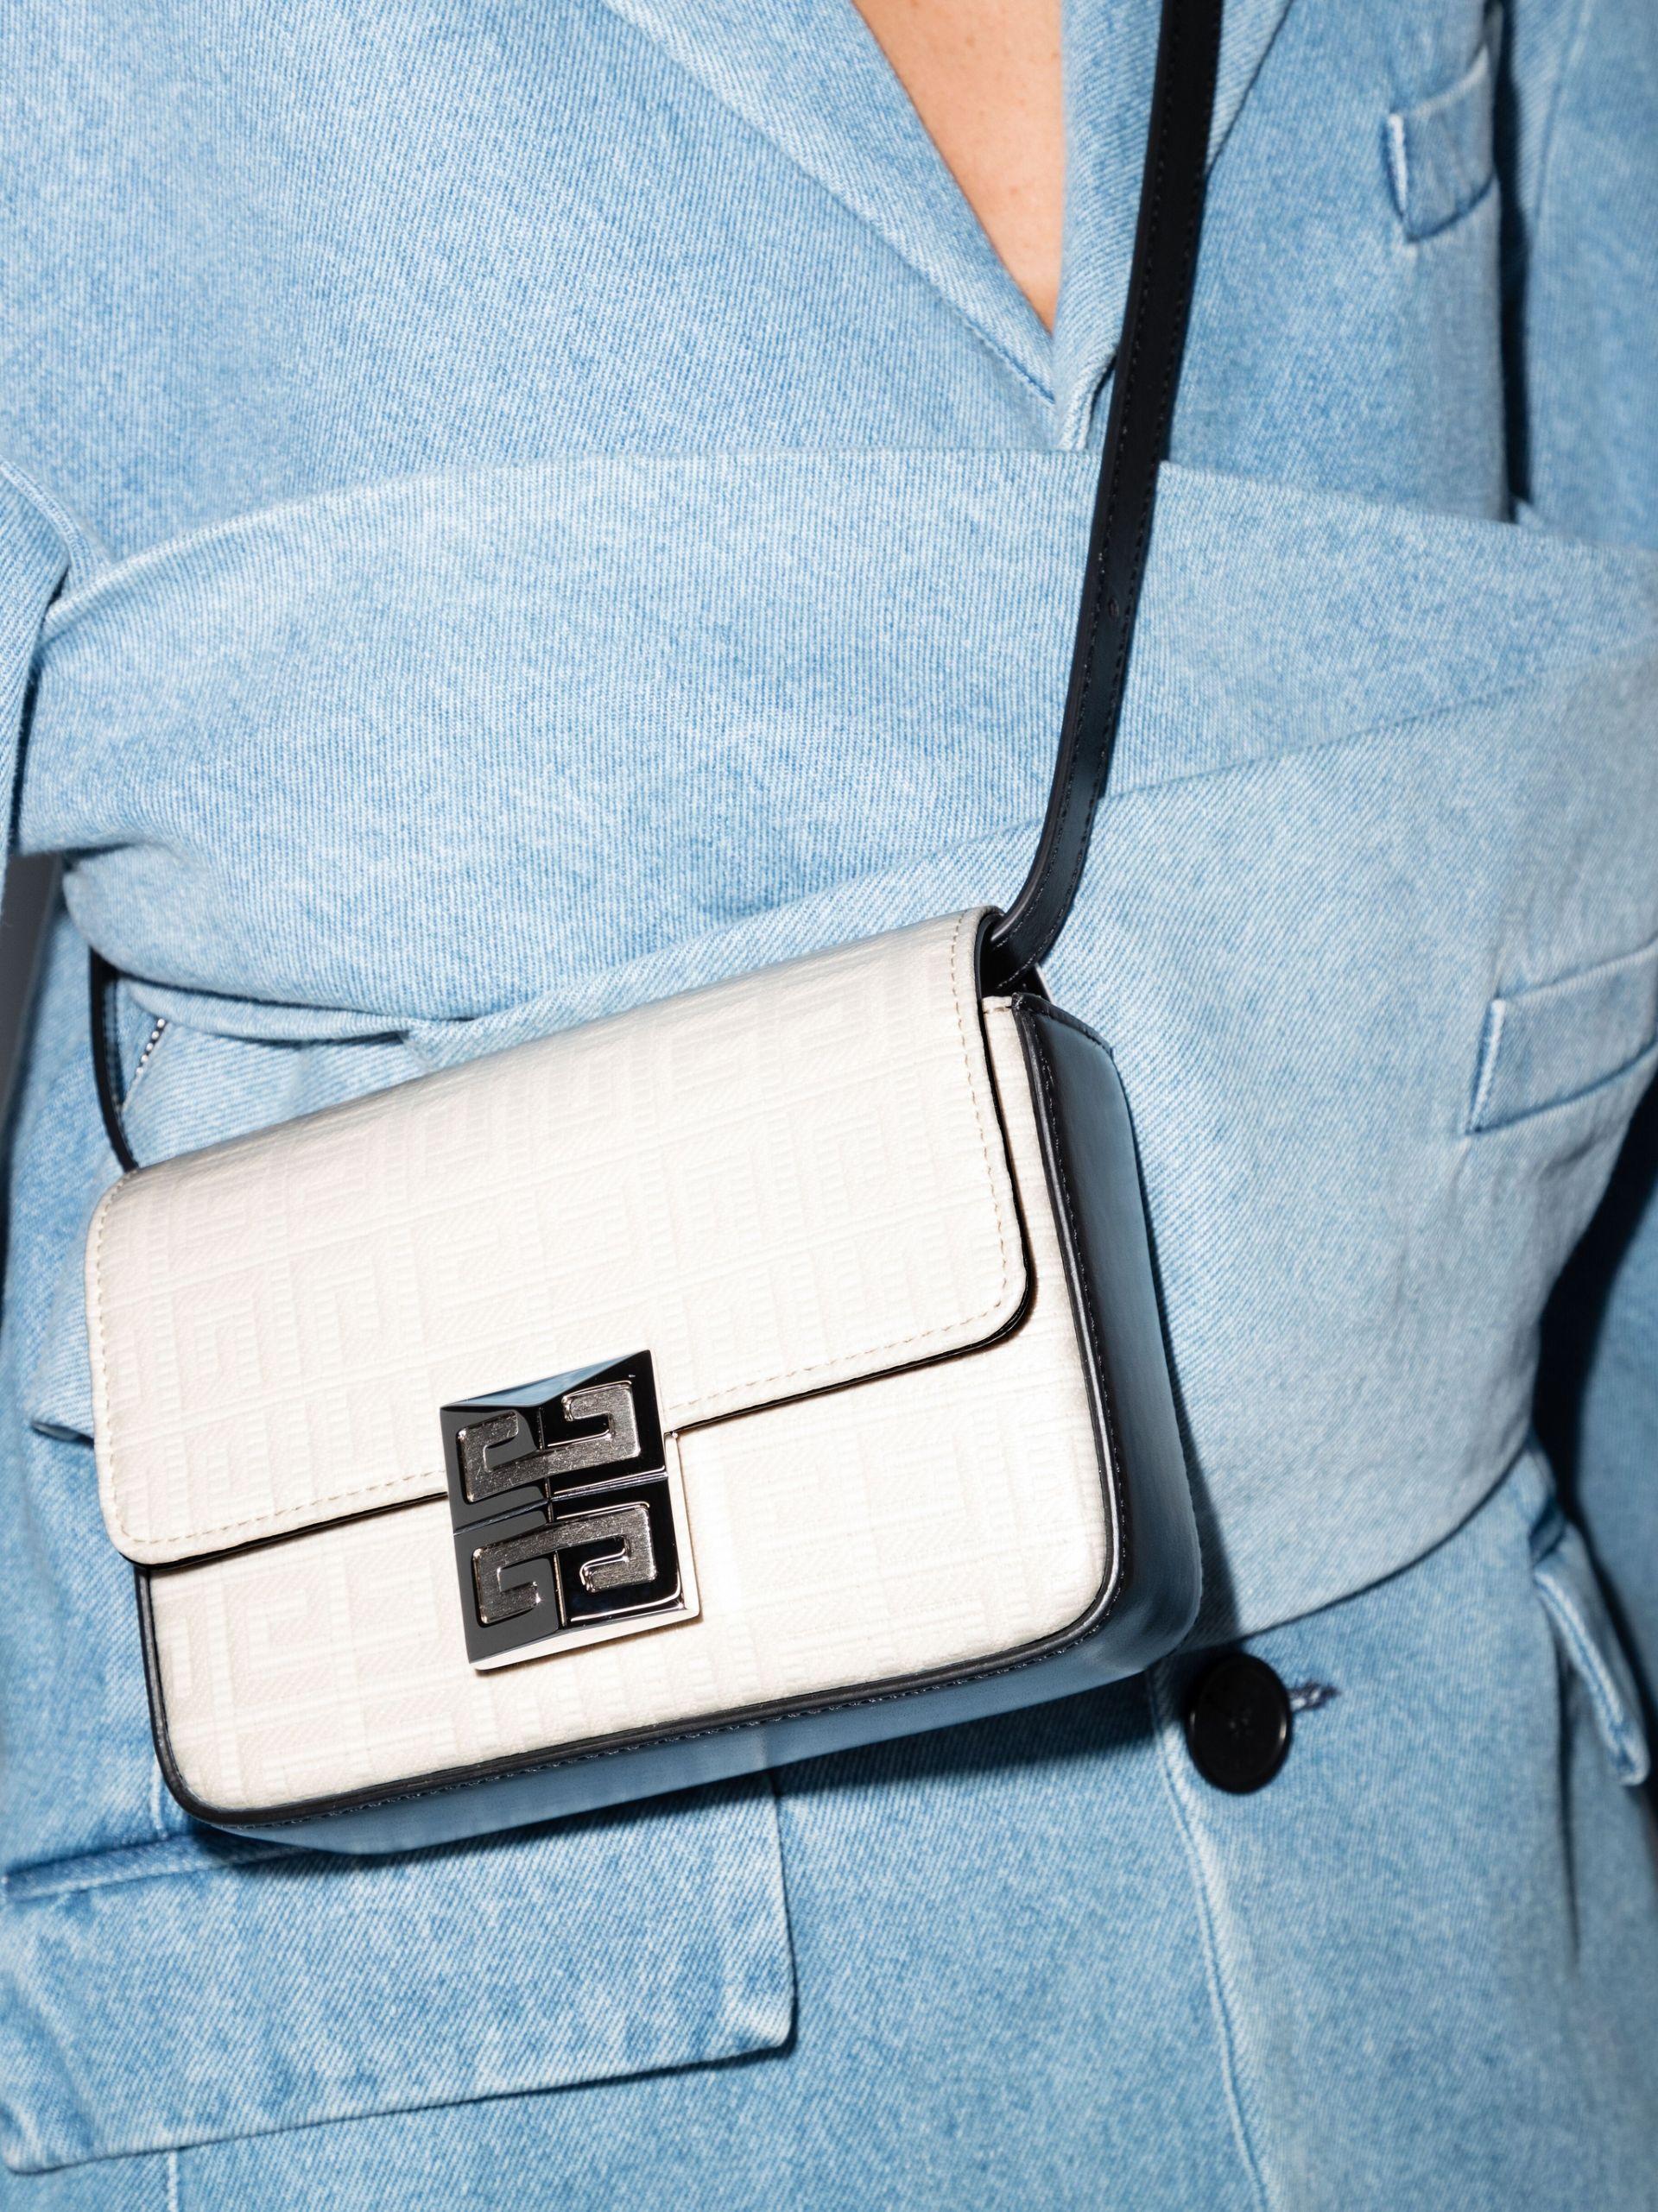 Givenchy 4g Small Leather Cross Body Bag in White | Lyst